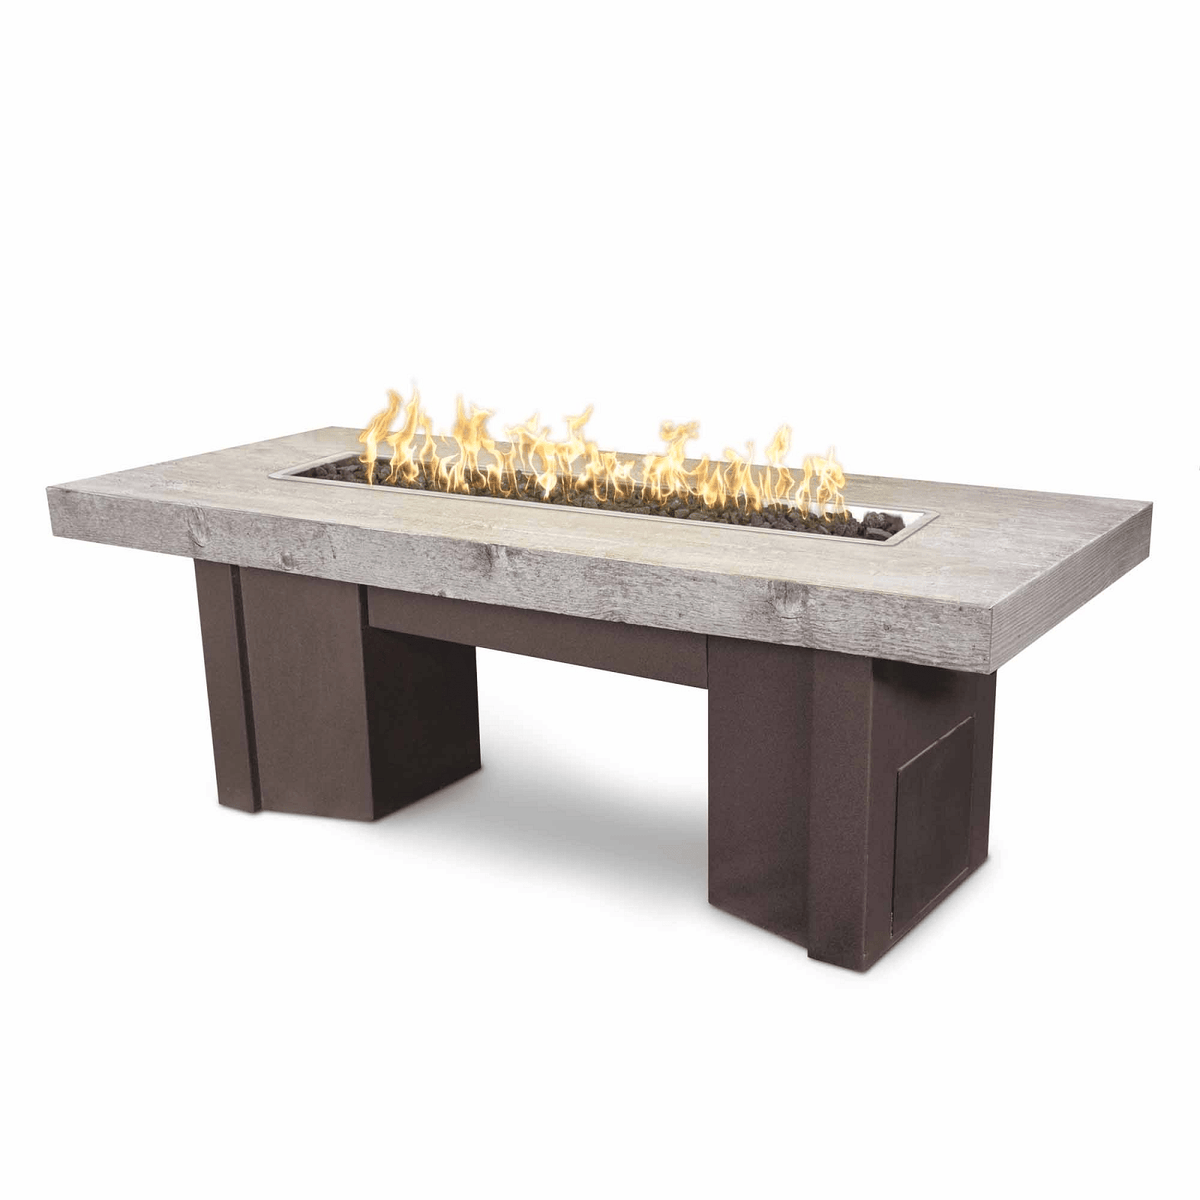 The Outdoor Plus Fire Features The Outdoor Plus 78&quot; Alameda Fire Table Wood Grain - 12V Electronic Ignition / OPT-ALMWG78E12V